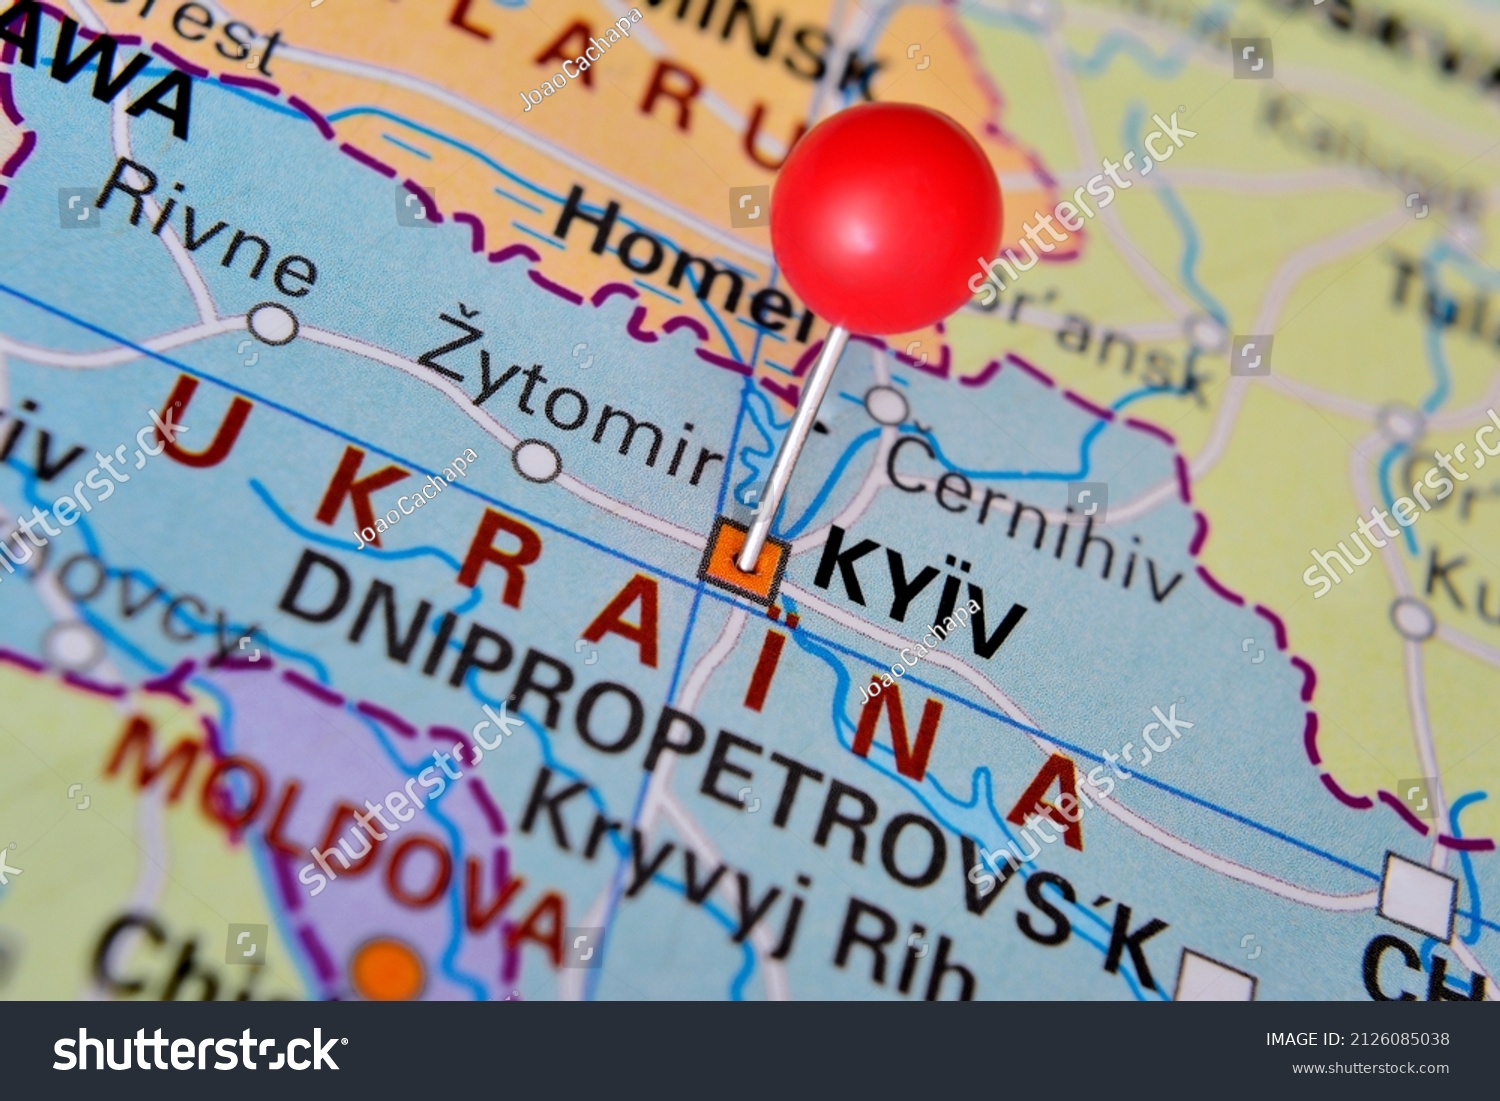 Stock Photo City Kiev Kyiv Located On Map With Red Pin In Ukraine 2126085038 